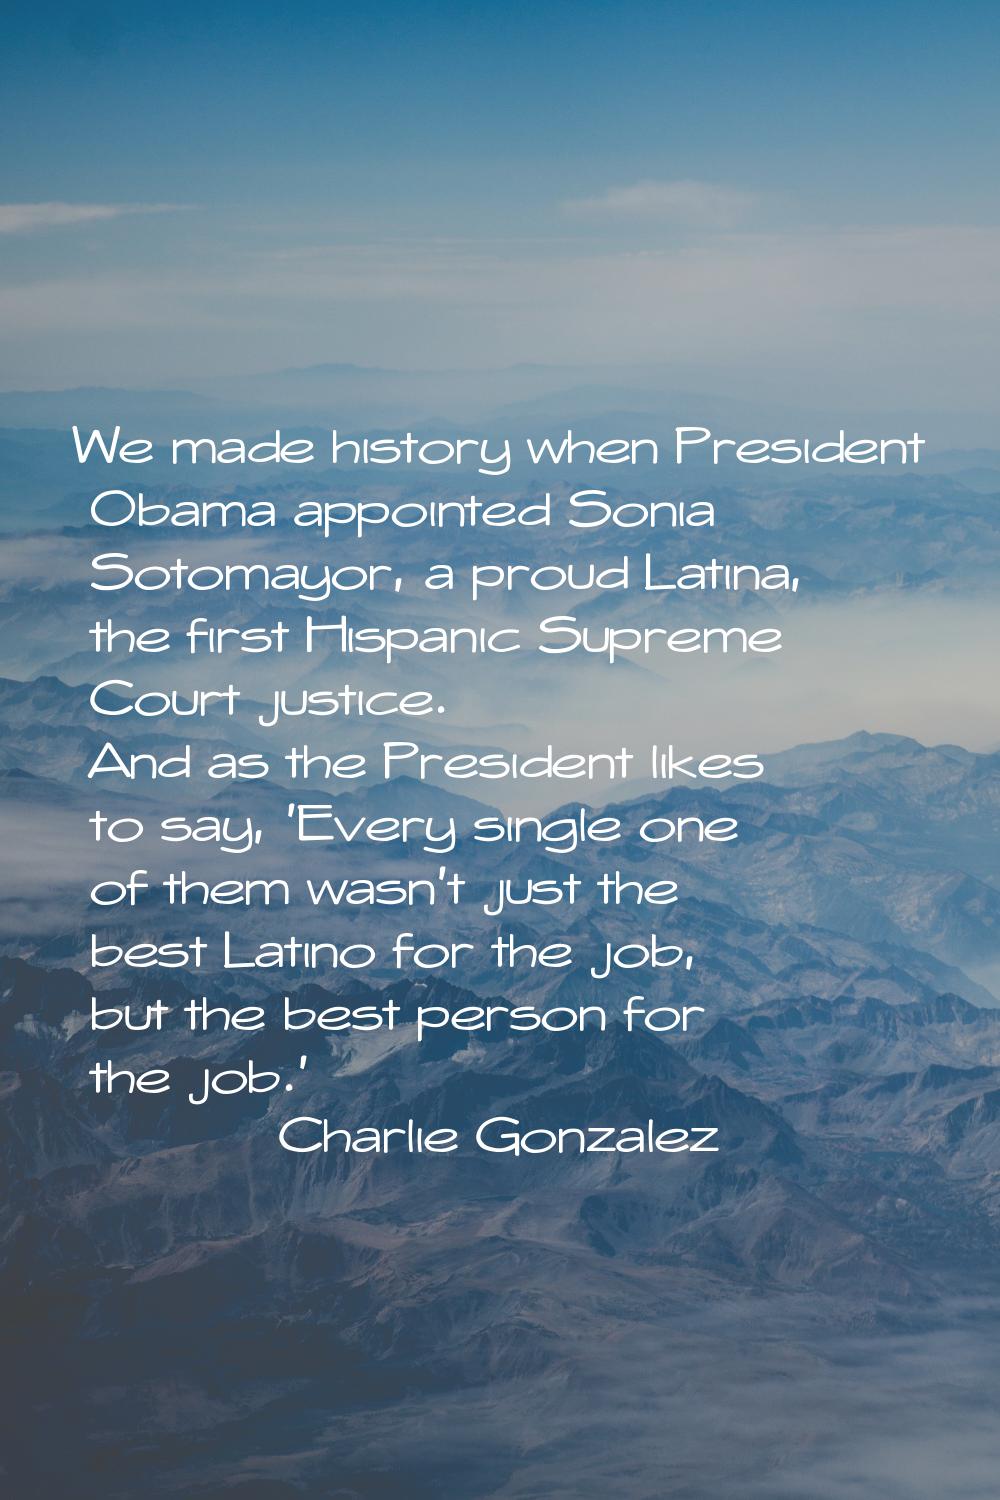 We made history when President Obama appointed Sonia Sotomayor, a proud Latina, the first Hispanic 